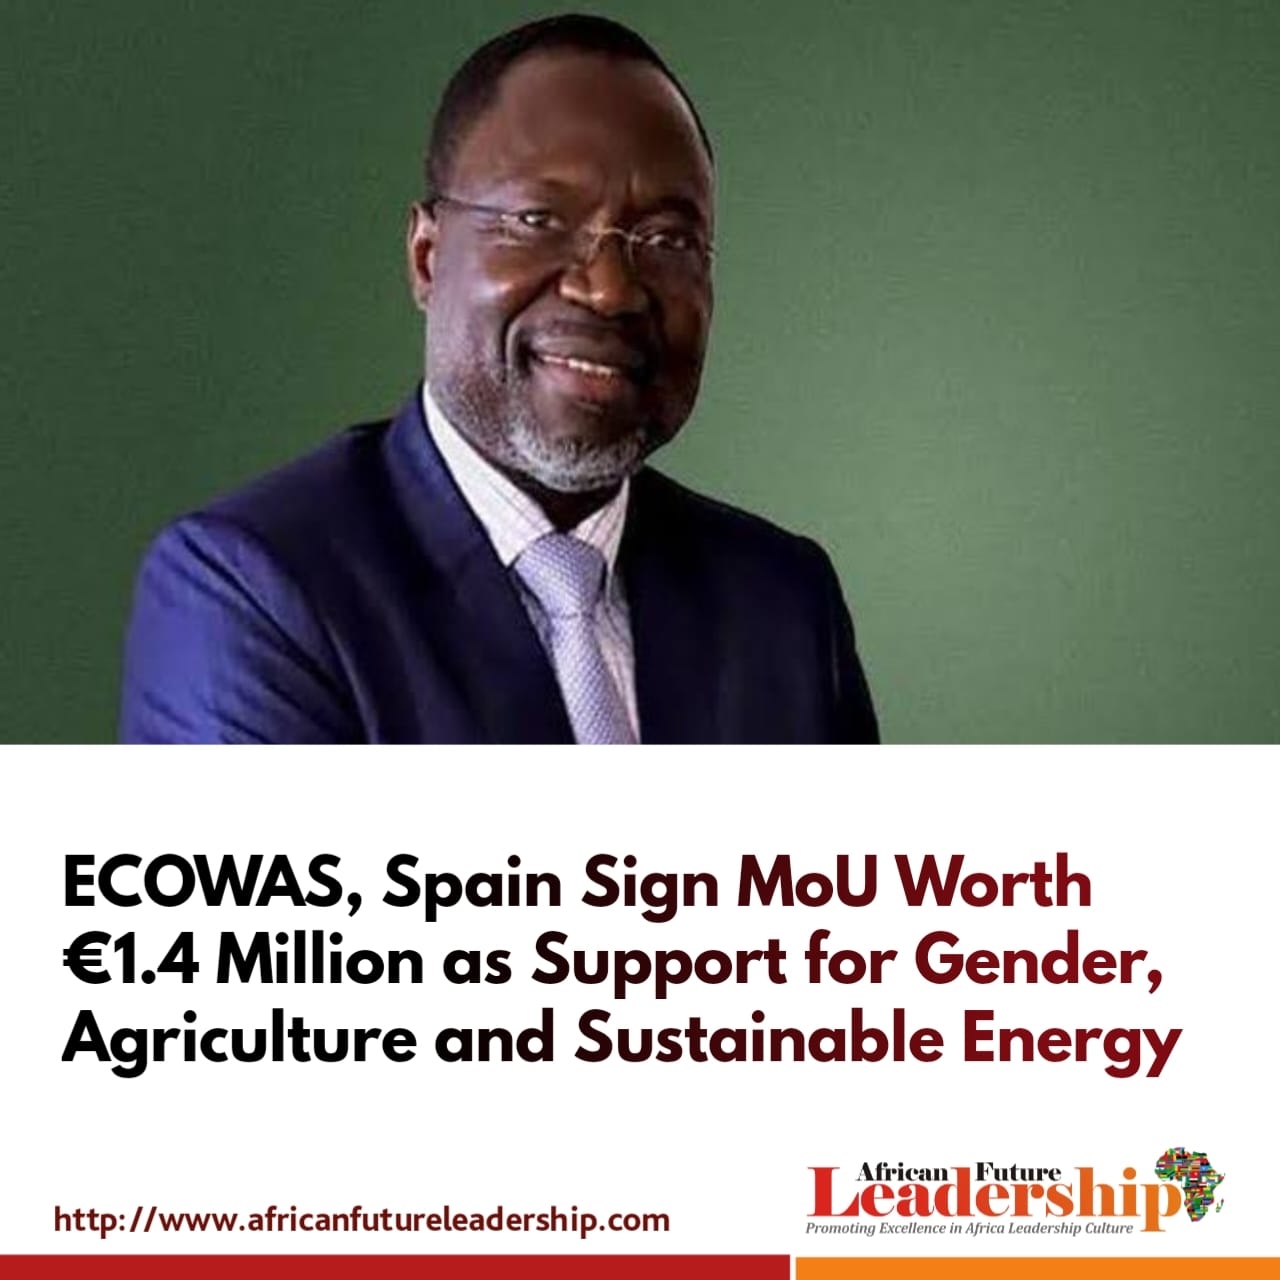 ECOWAS, Spain Sign MoU Worth €1.4 Million as Support for Gender, Agriculture and Sustainable Energy